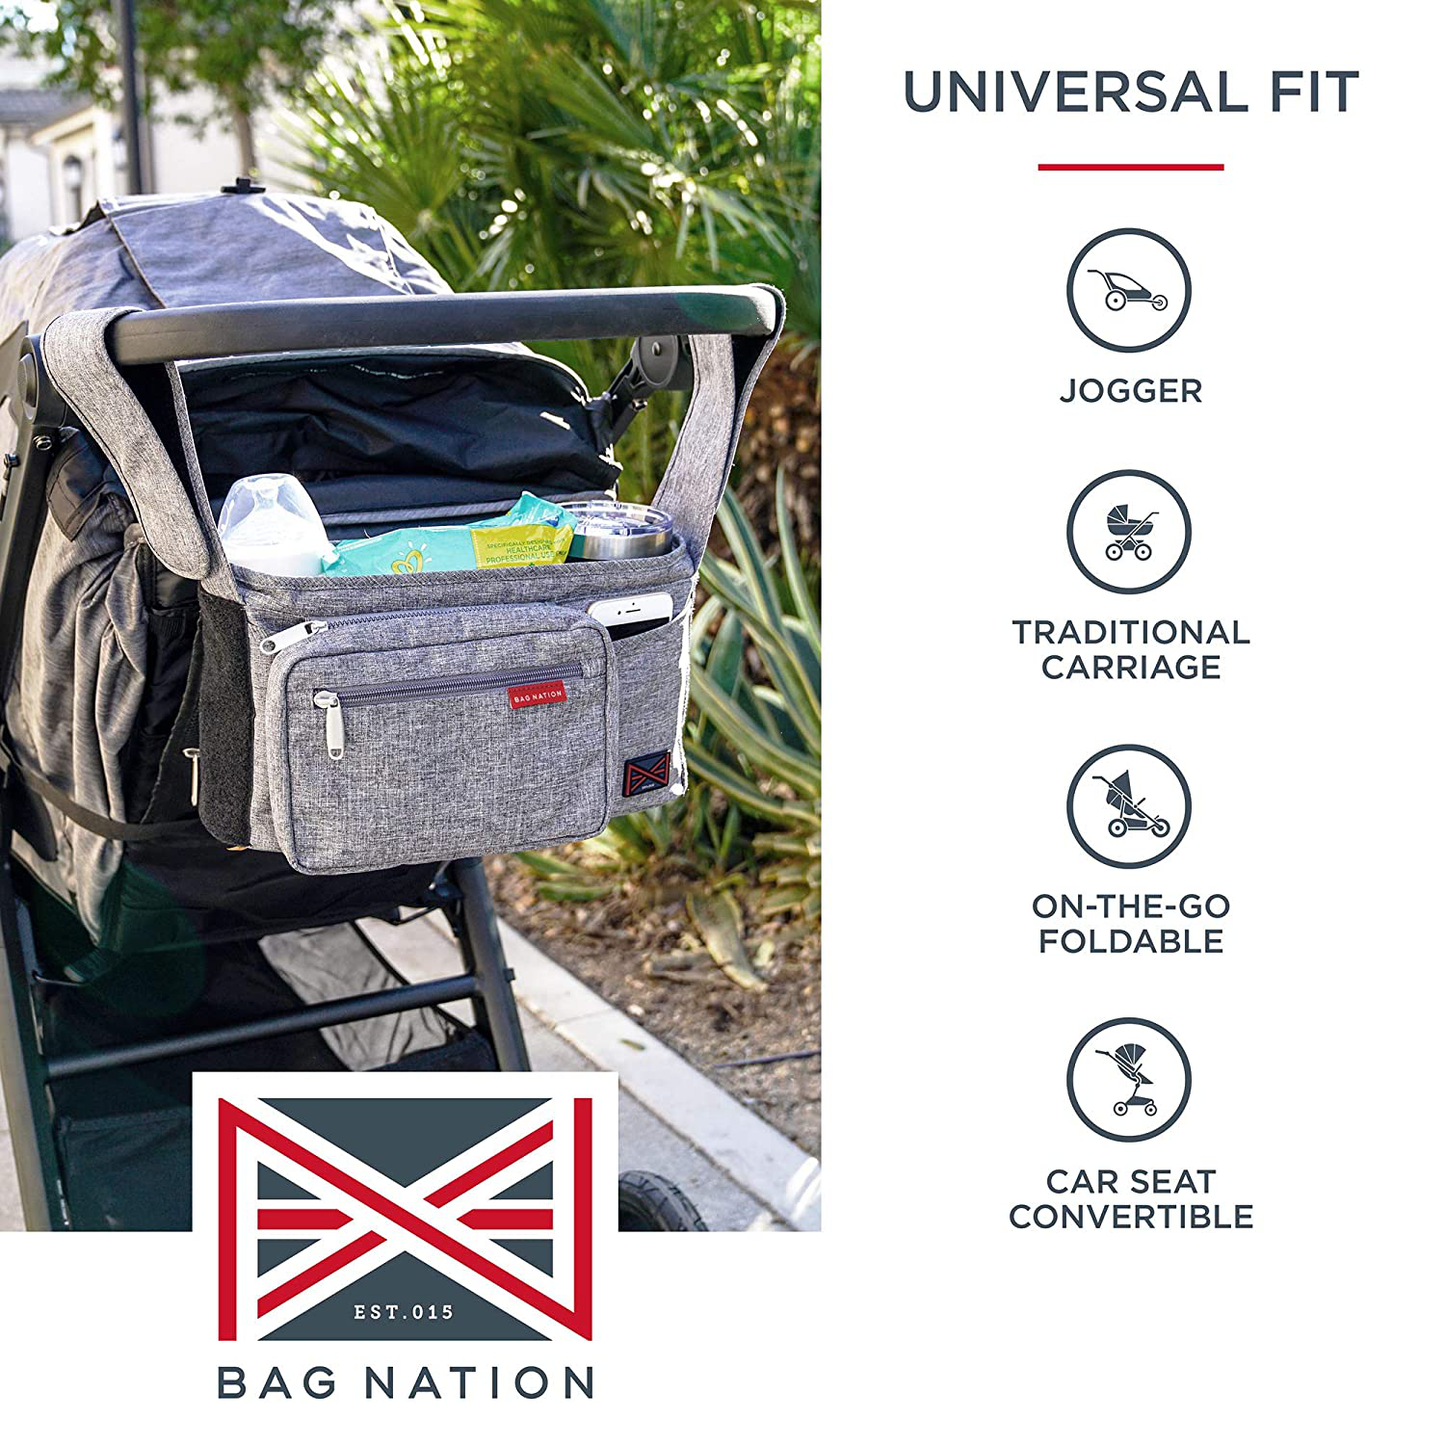 Bag Nation Universal Stroller Organizer Caddy Featuring Cup Holders, Large Main Pocket Compatible with Uppababy, Baby Jogger, Britax, Bugaboo, BOB, Umbrella and Pet Stroller - Grey Animals & Pet Supplies > Pet Supplies > Dog Supplies > Dog Treadmills Bag Nation   